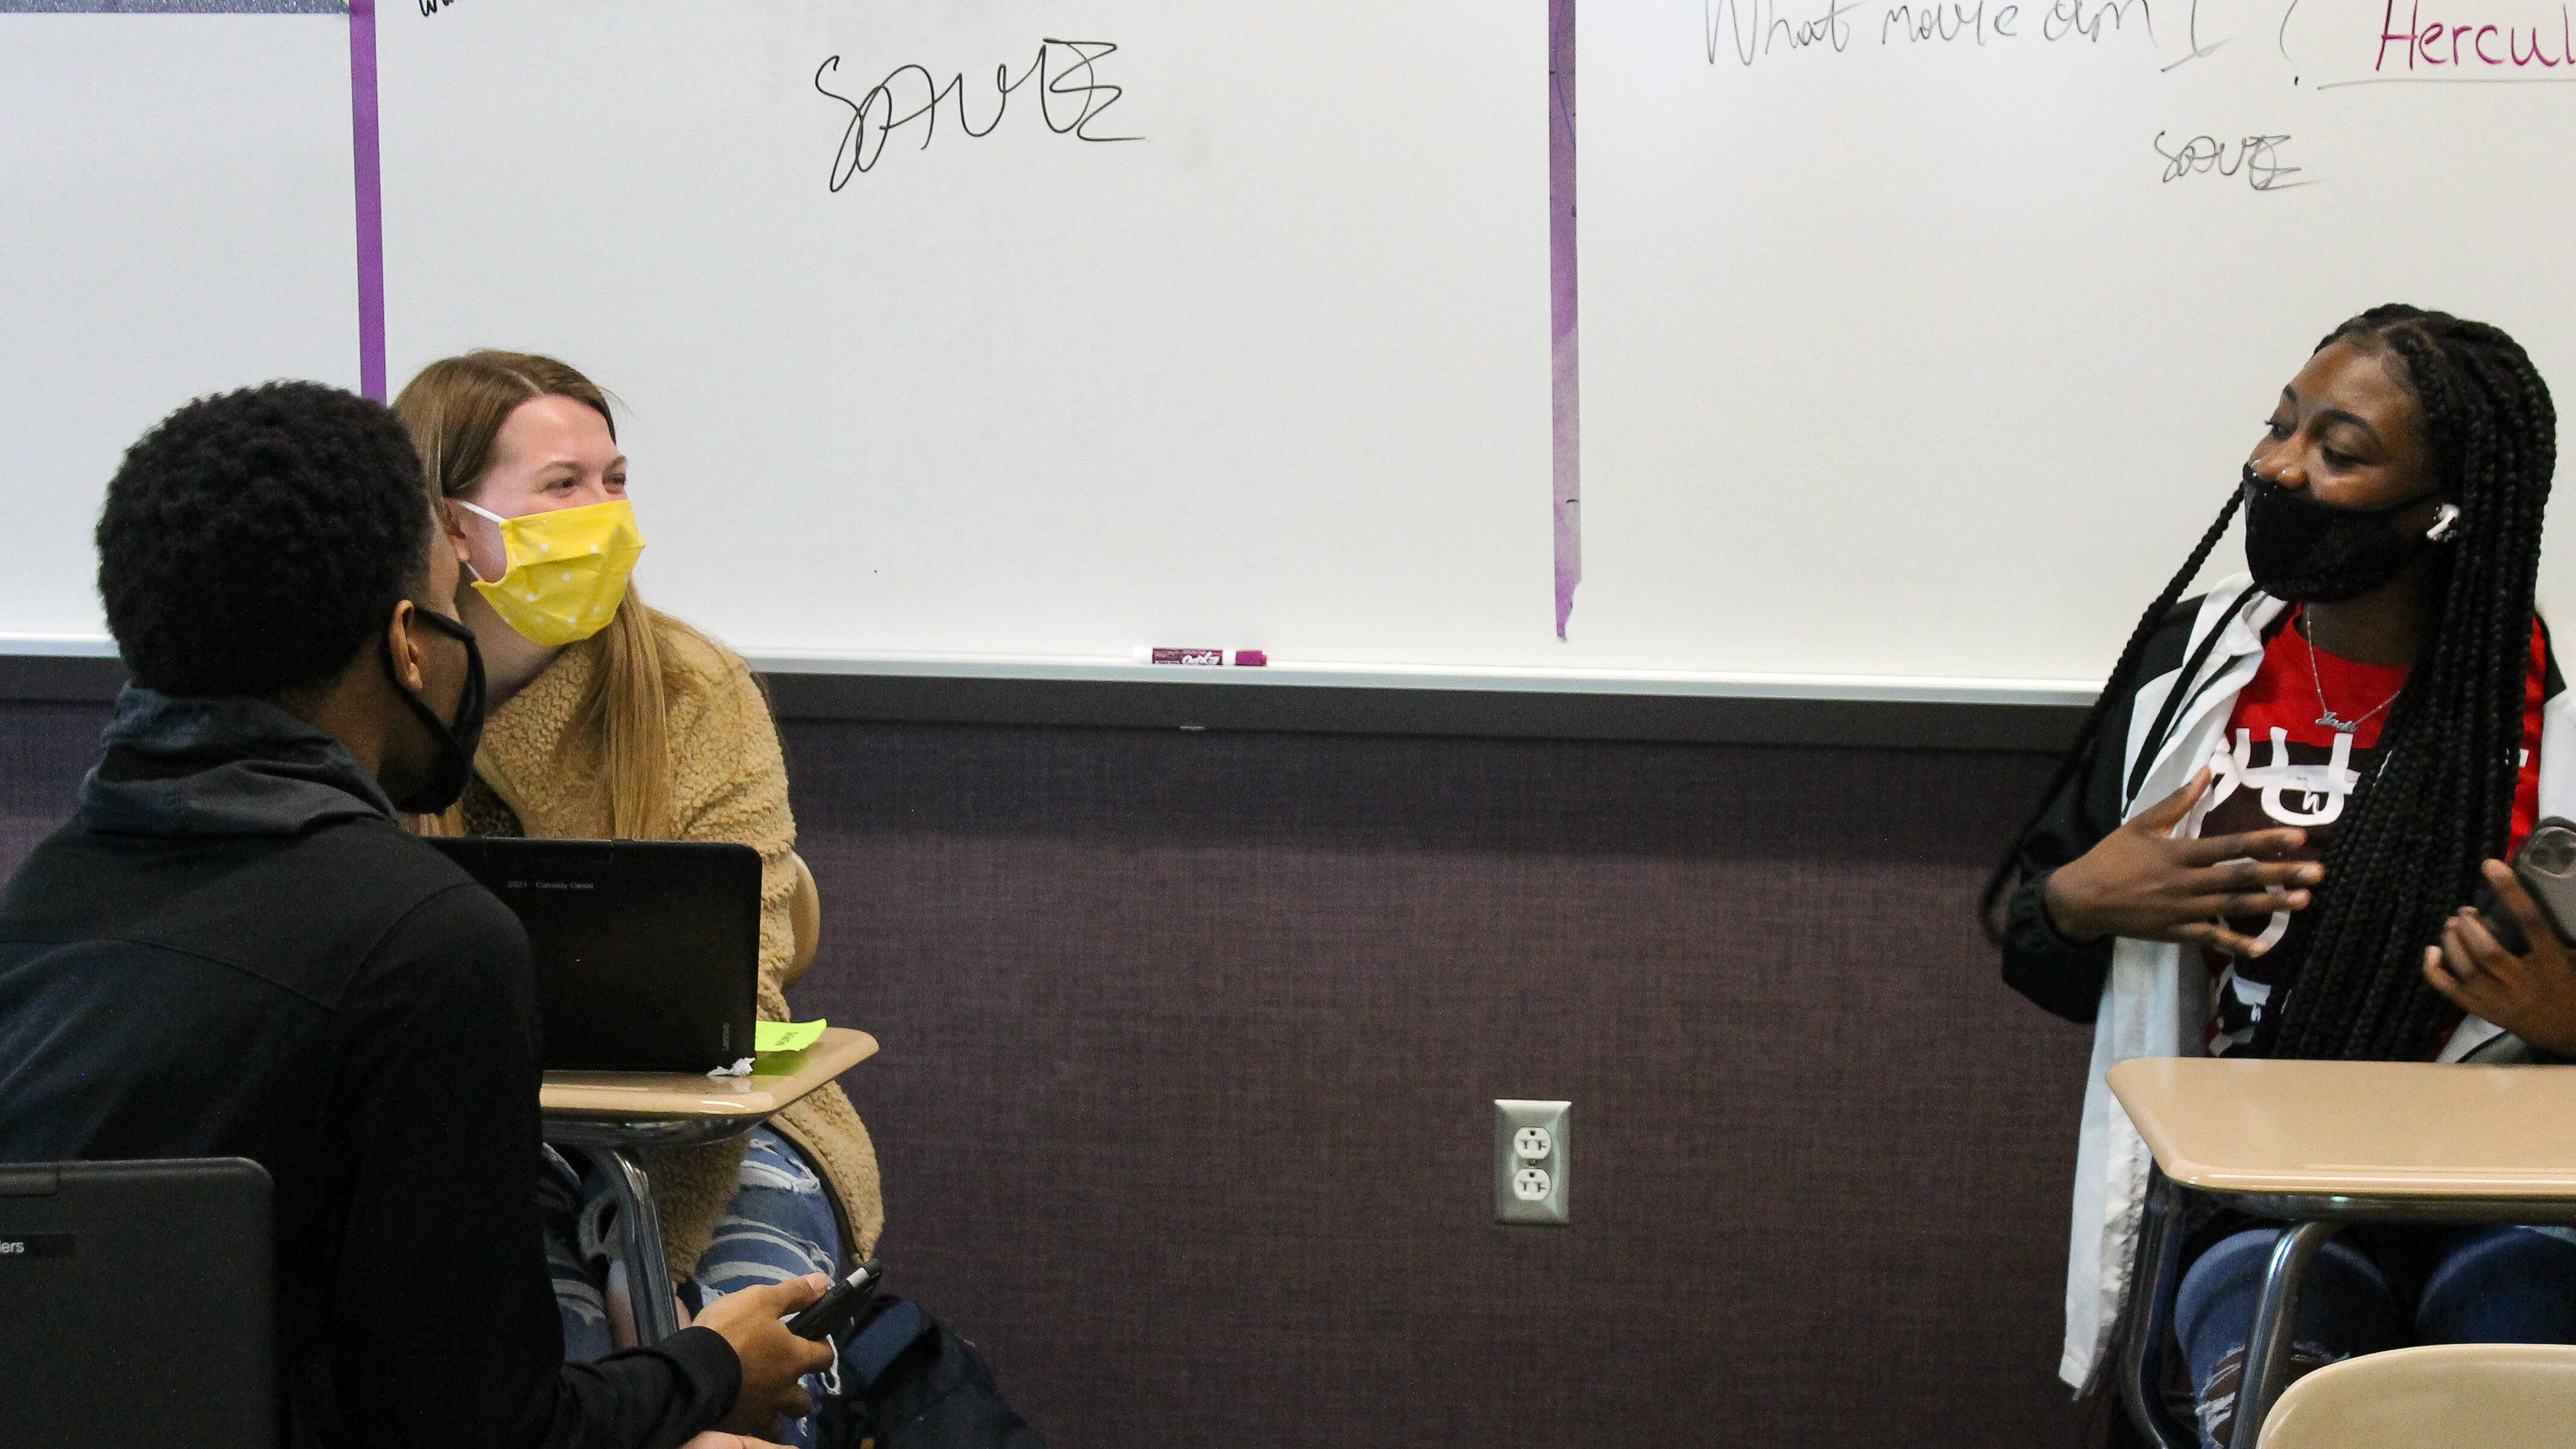 In front of a classroom white board, a student in a yellow sweater wearing a bright yellow mask sits next to a student in a black sweatshirt with a black mask. They are talking to another student seated in a desk several feet away with a red shirt and a black face mask holding her hand to her chest in the middle of speaking.